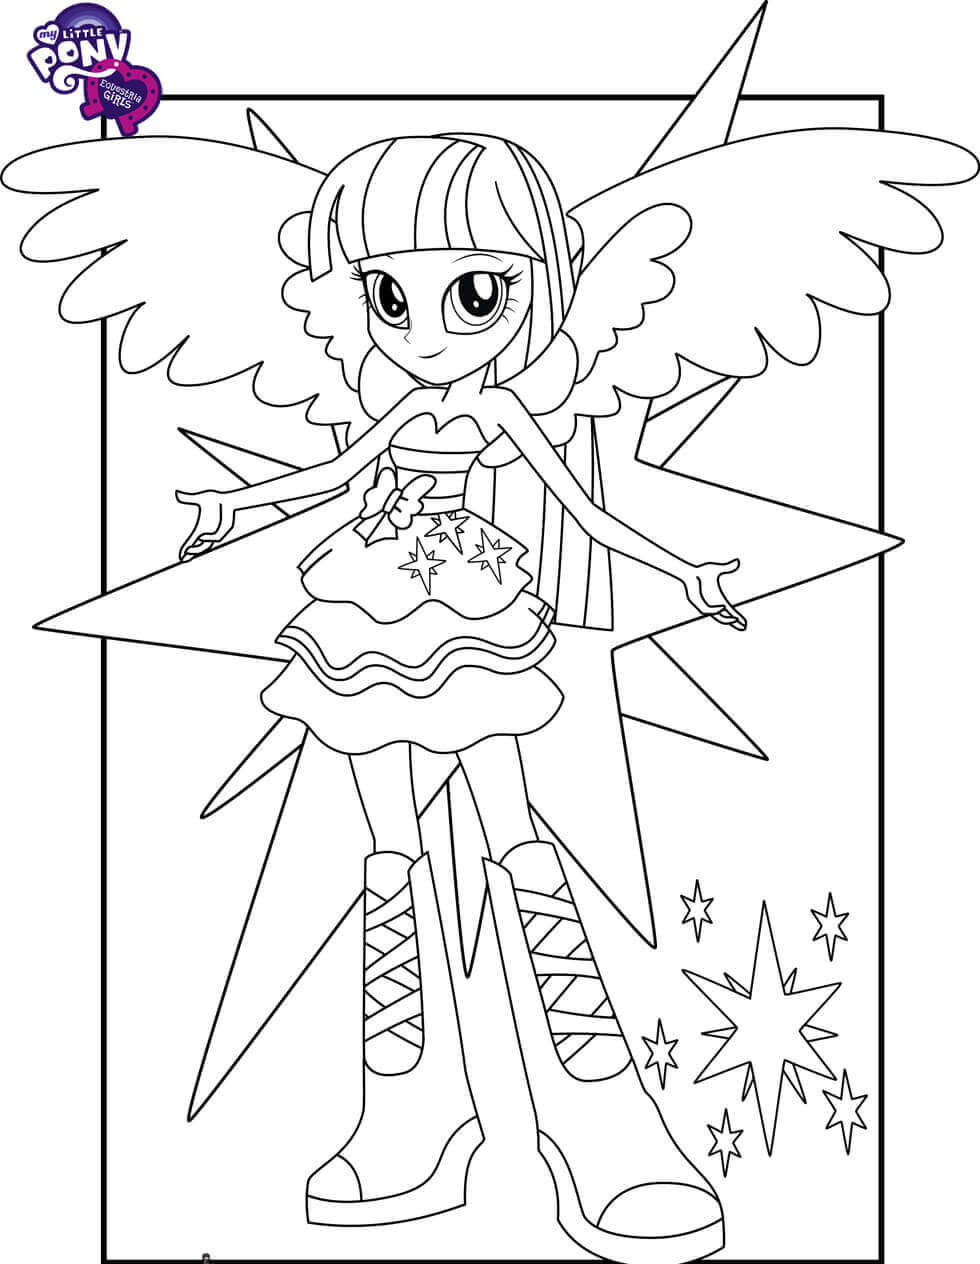 Twilight Sparkle From My Little Pony Equestria Girls Coloring Page